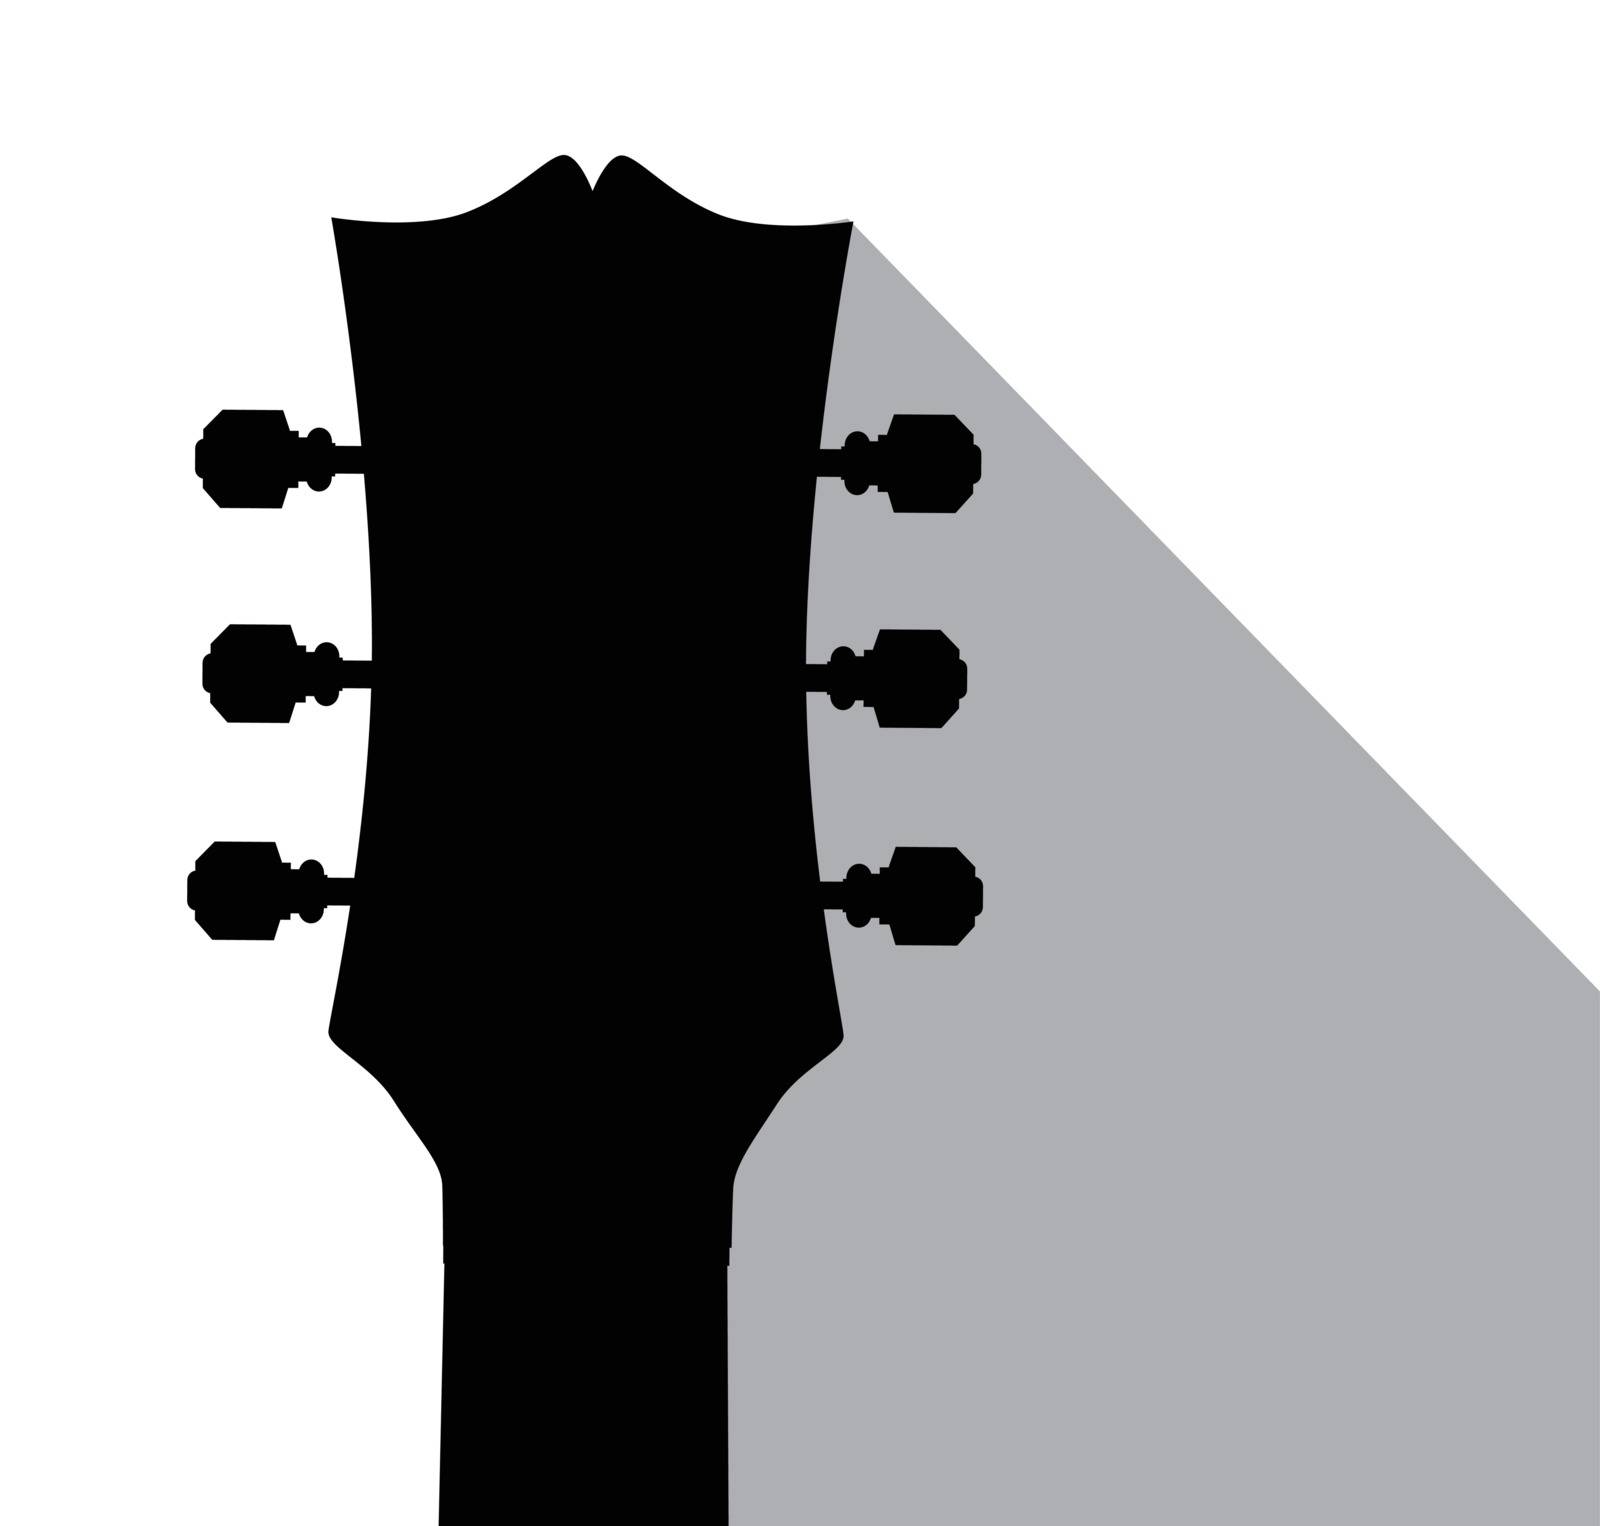 A traditional guitar headstock with dark shadow